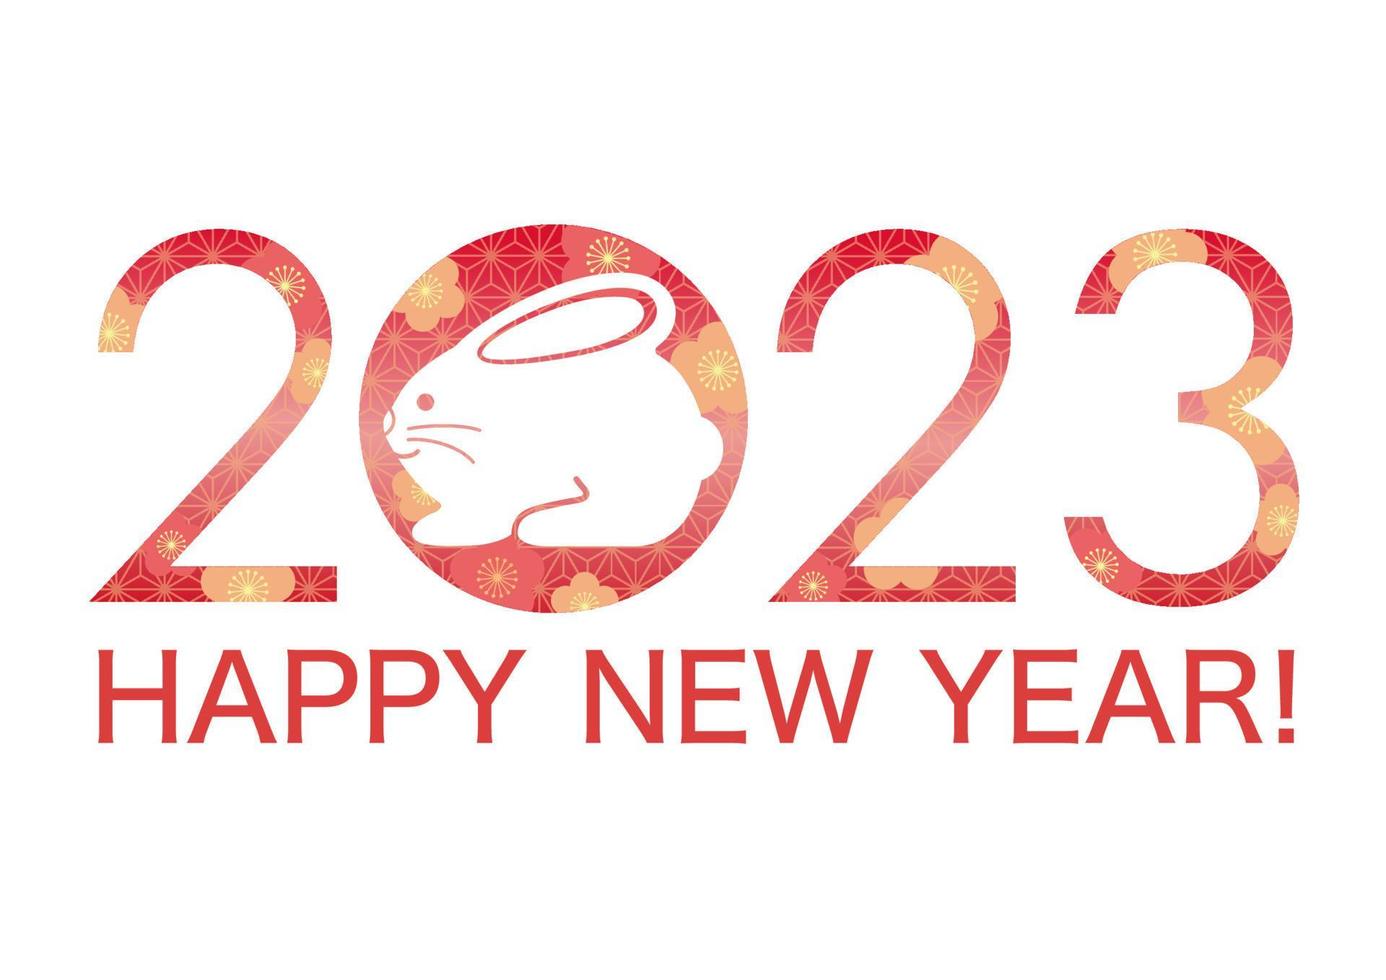 The Year 2023, The Year Of The Rabbit, Greeting Symbol With A Rabbit Mascot Decorated With Japanese Vintage Patterns. vector